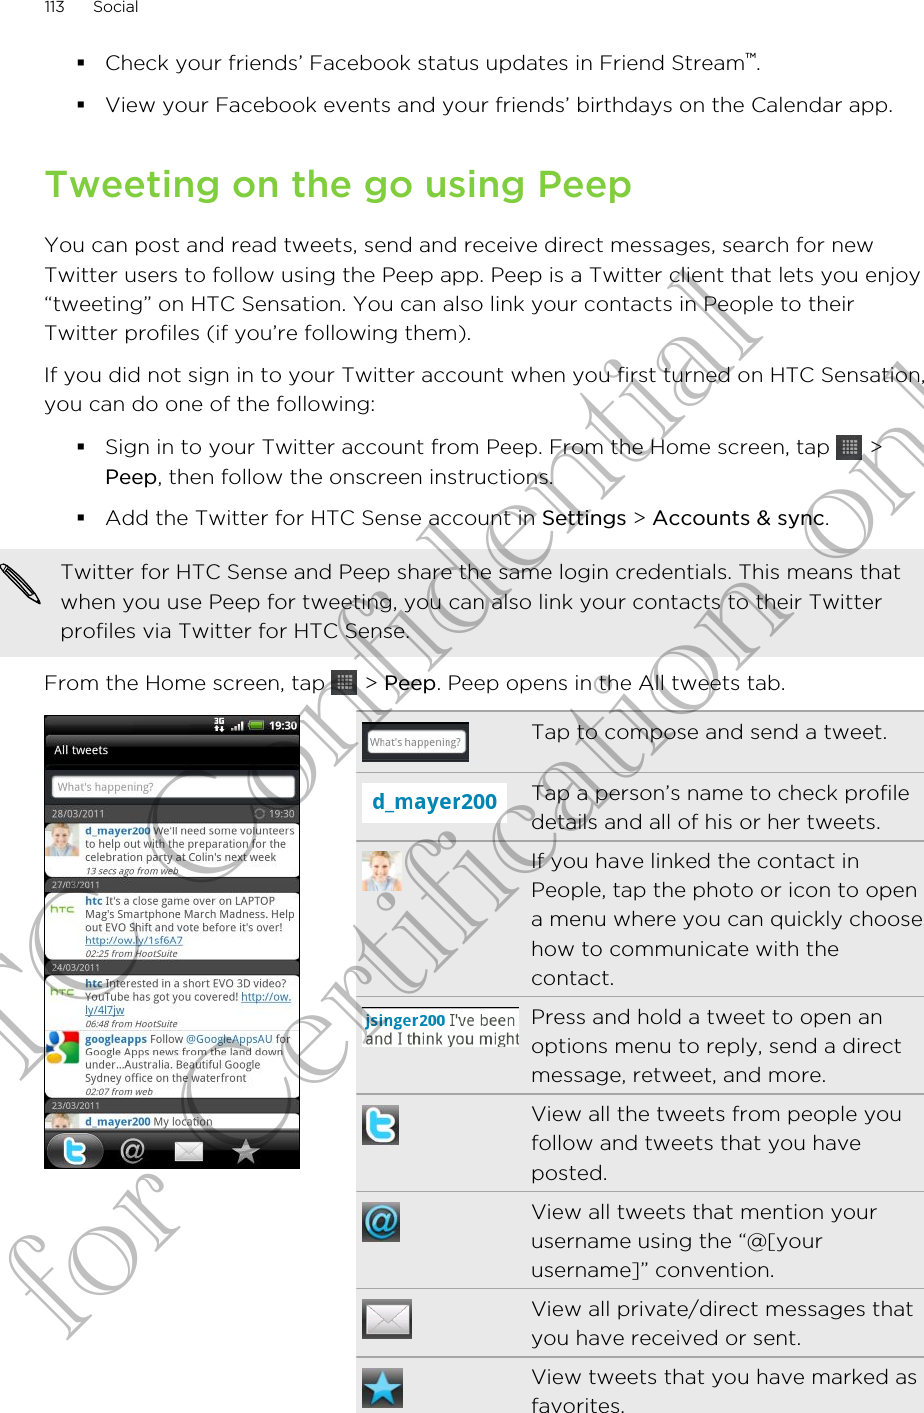 §Check your friends’ Facebook status updates in Friend Stream™.§View your Facebook events and your friends’ birthdays on the Calendar app.Tweeting on the go using PeepYou can post and read tweets, send and receive direct messages, search for newTwitter users to follow using the Peep app. Peep is a Twitter client that lets you enjoy“tweeting” on HTC Sensation. You can also link your contacts in People to theirTwitter profiles (if you’re following them).If you did not sign in to your Twitter account when you first turned on HTC Sensation,you can do one of the following:§Sign in to your Twitter account from Peep. From the Home screen, tap   &gt;Peep, then follow the onscreen instructions.§Add the Twitter for HTC Sense account in Settings &gt; Accounts &amp; sync.Twitter for HTC Sense and Peep share the same login credentials. This means thatwhen you use Peep for tweeting, you can also link your contacts to their Twitterprofiles via Twitter for HTC Sense.From the Home screen, tap   &gt; Peep. Peep opens in the All tweets tab.Tap to compose and send a tweet.Tap a person’s name to check profiledetails and all of his or her tweets.If you have linked the contact inPeople, tap the photo or icon to opena menu where you can quickly choosehow to communicate with thecontact.Press and hold a tweet to open anoptions menu to reply, send a directmessage, retweet, and more.View all the tweets from people youfollow and tweets that you haveposted.View all tweets that mention yourusername using the “@[yourusername]” convention.View all private/direct messages thatyou have received or sent.View tweets that you have marked asfavorites.113 SocialHTC Confidential for Certification only